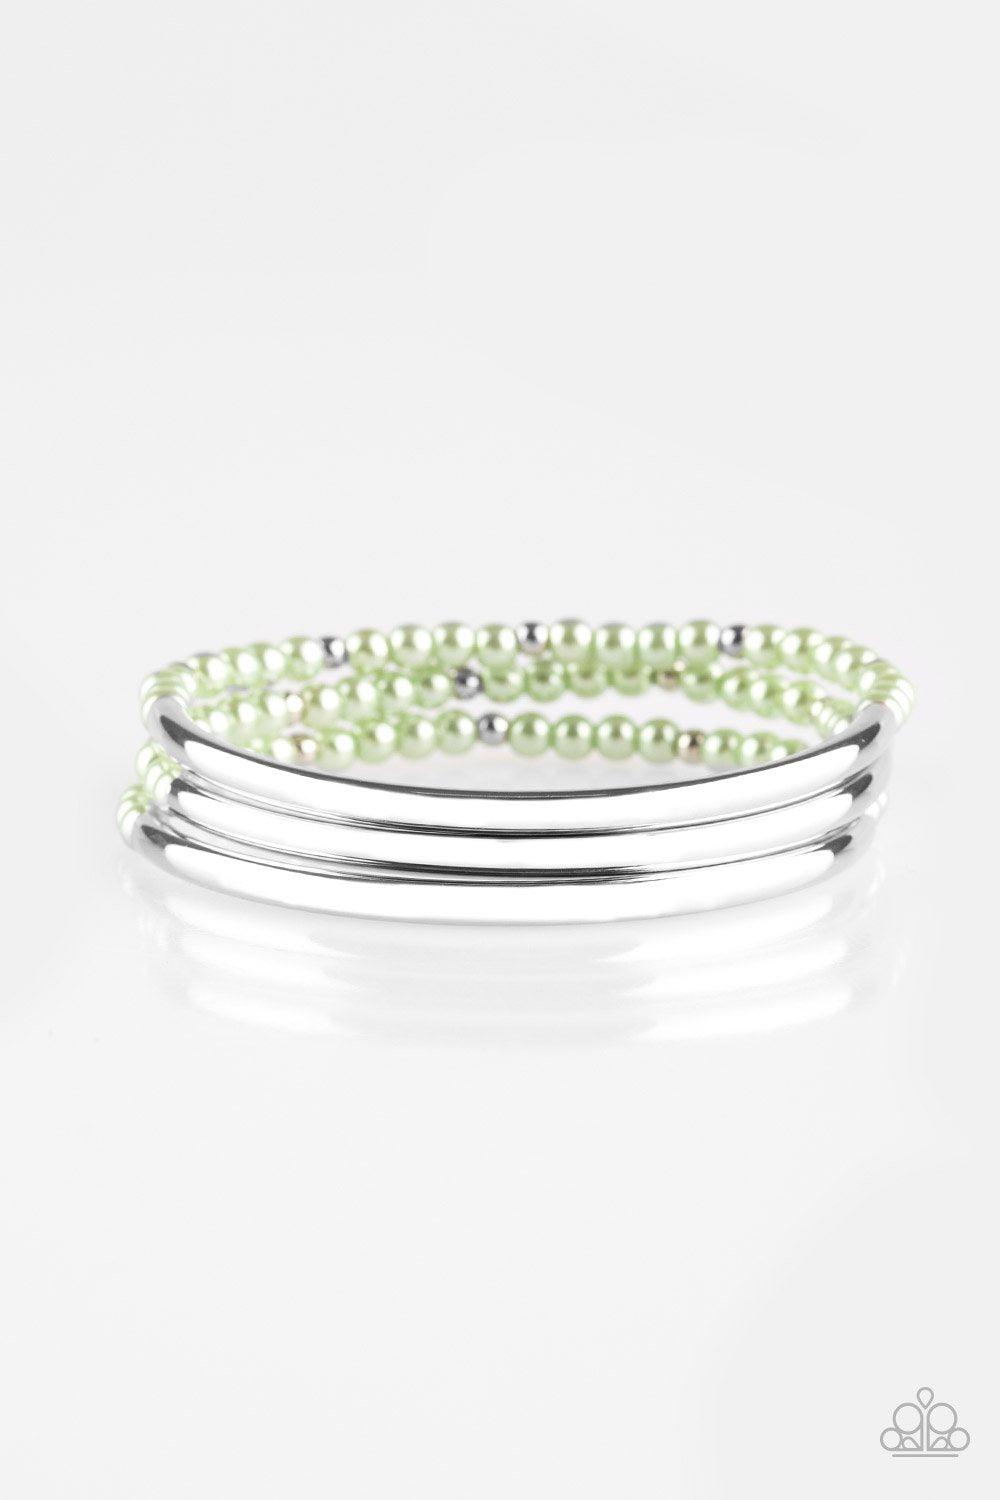 City Pretty Mint Green and Silver Bracelet Set - Paparazzi Accessories - lightbox -CarasShop.com - $5 Jewelry by Cara Jewels